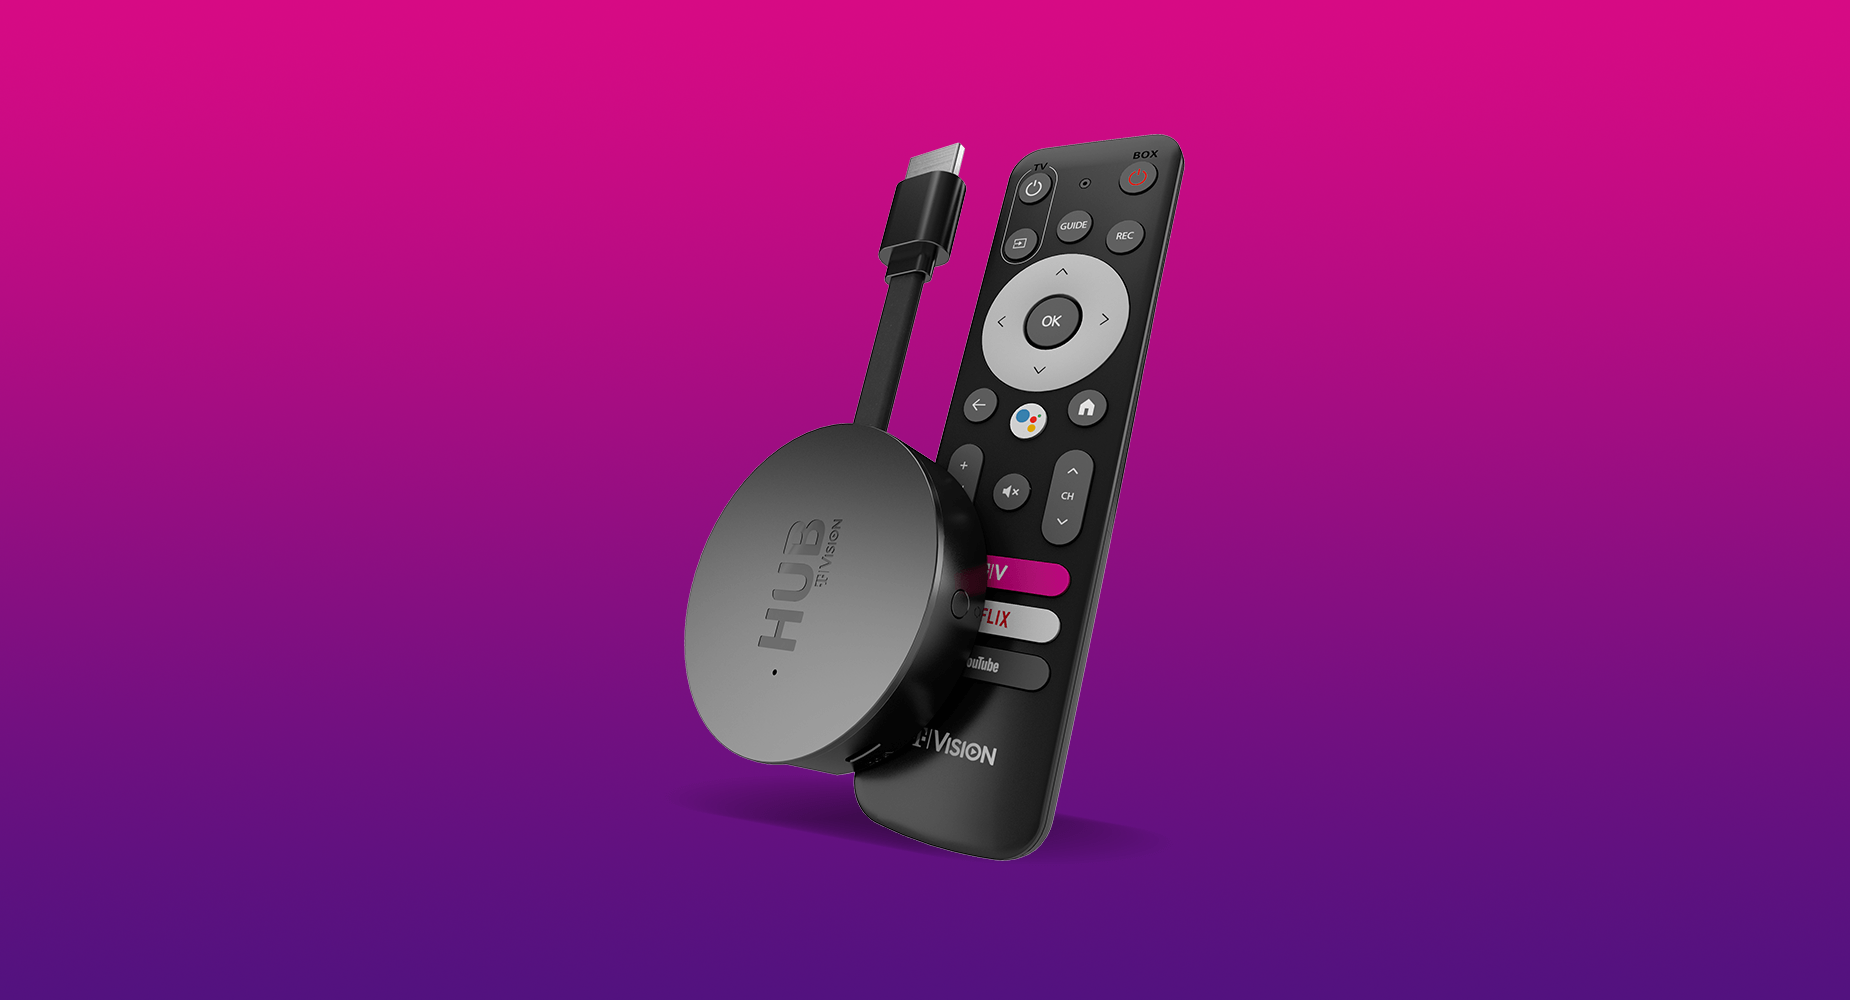 T-Mobile is launching its own Google TV dongle to compete with the Chromecast